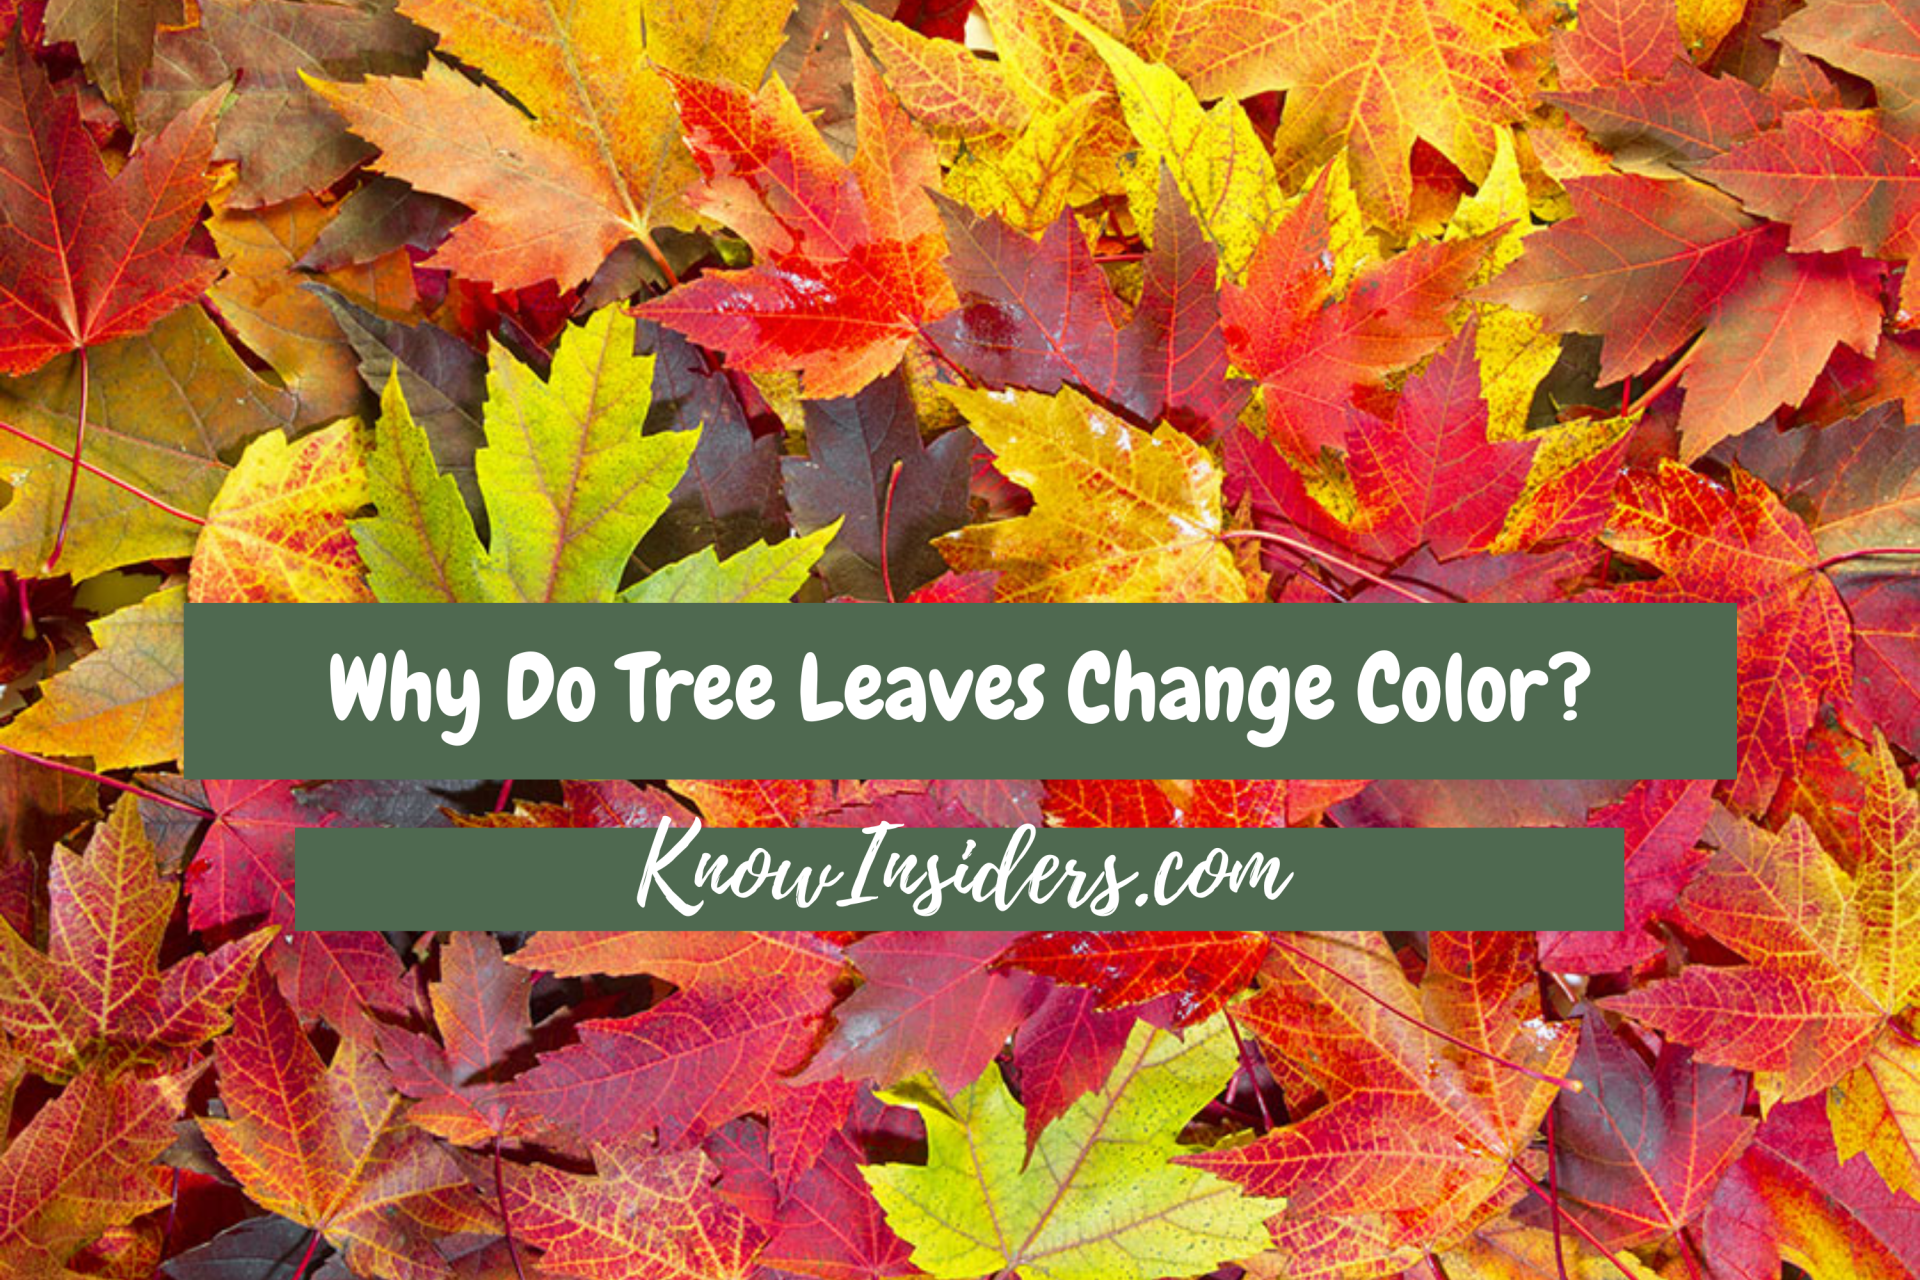 Why Do Tree Leaves Change Color?